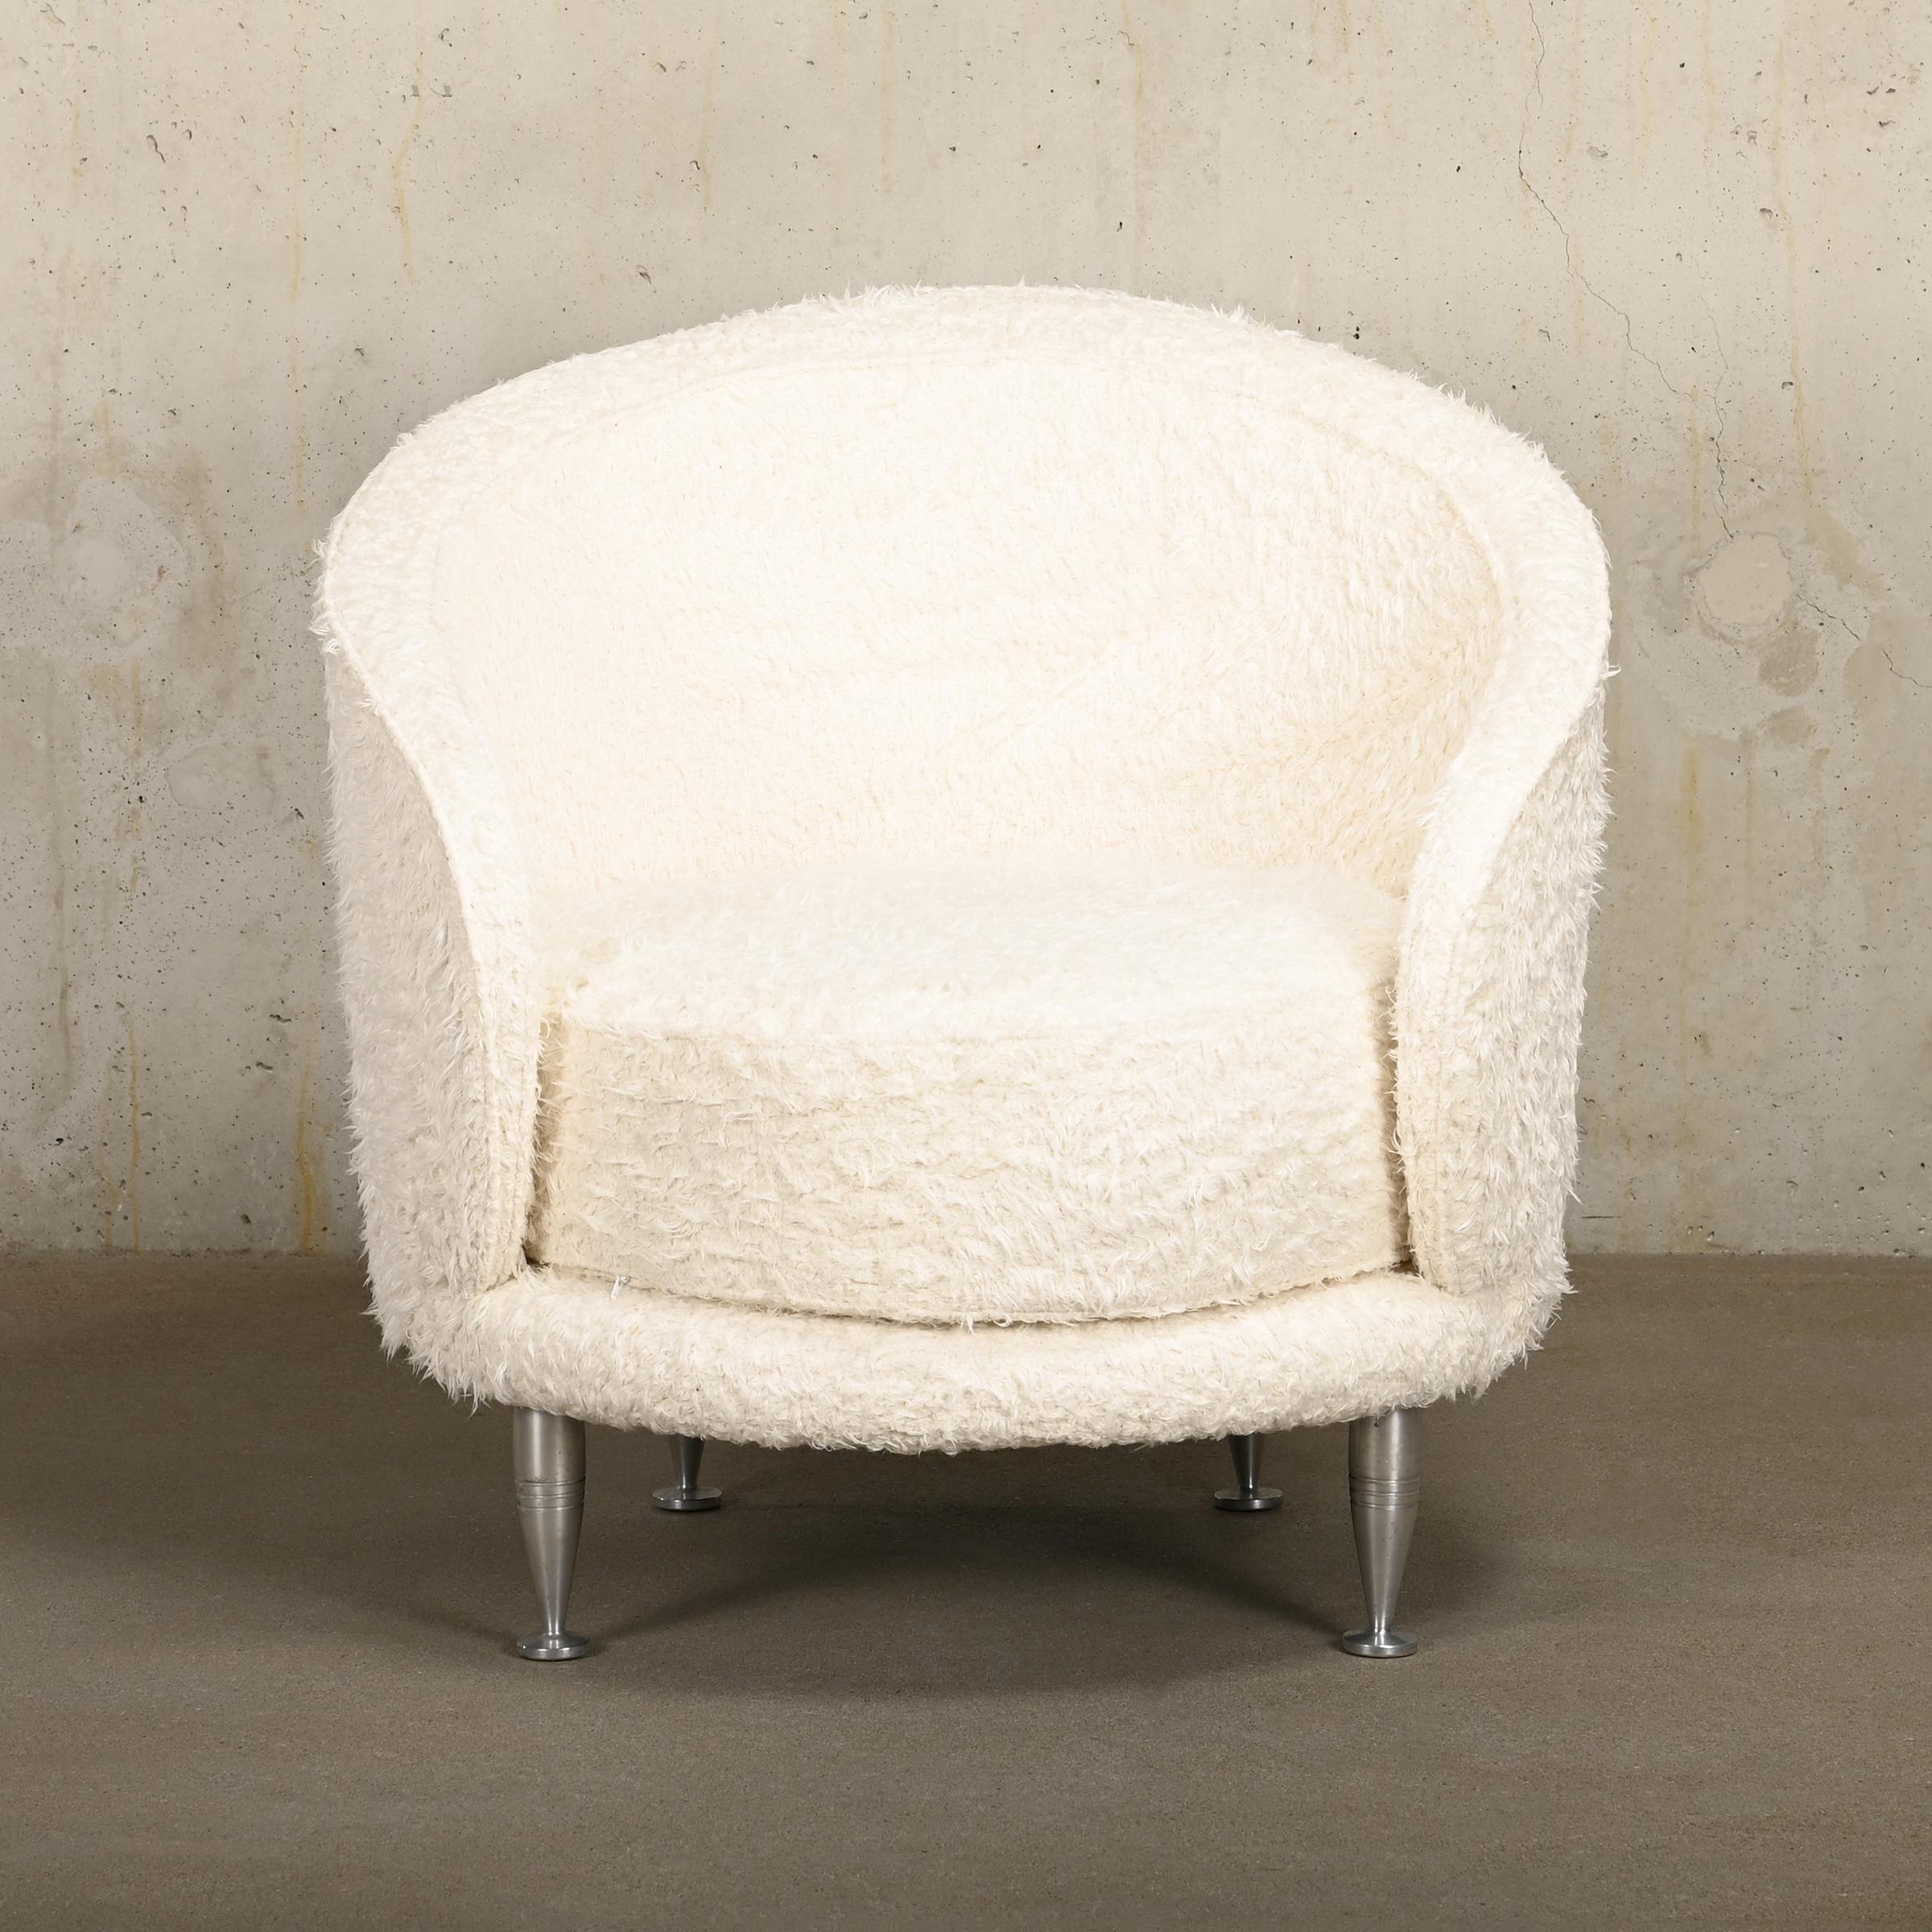 Contemporary Massimo Iosa Ghini Armchair New Tone in white long pile cotton for Moroso, Italy